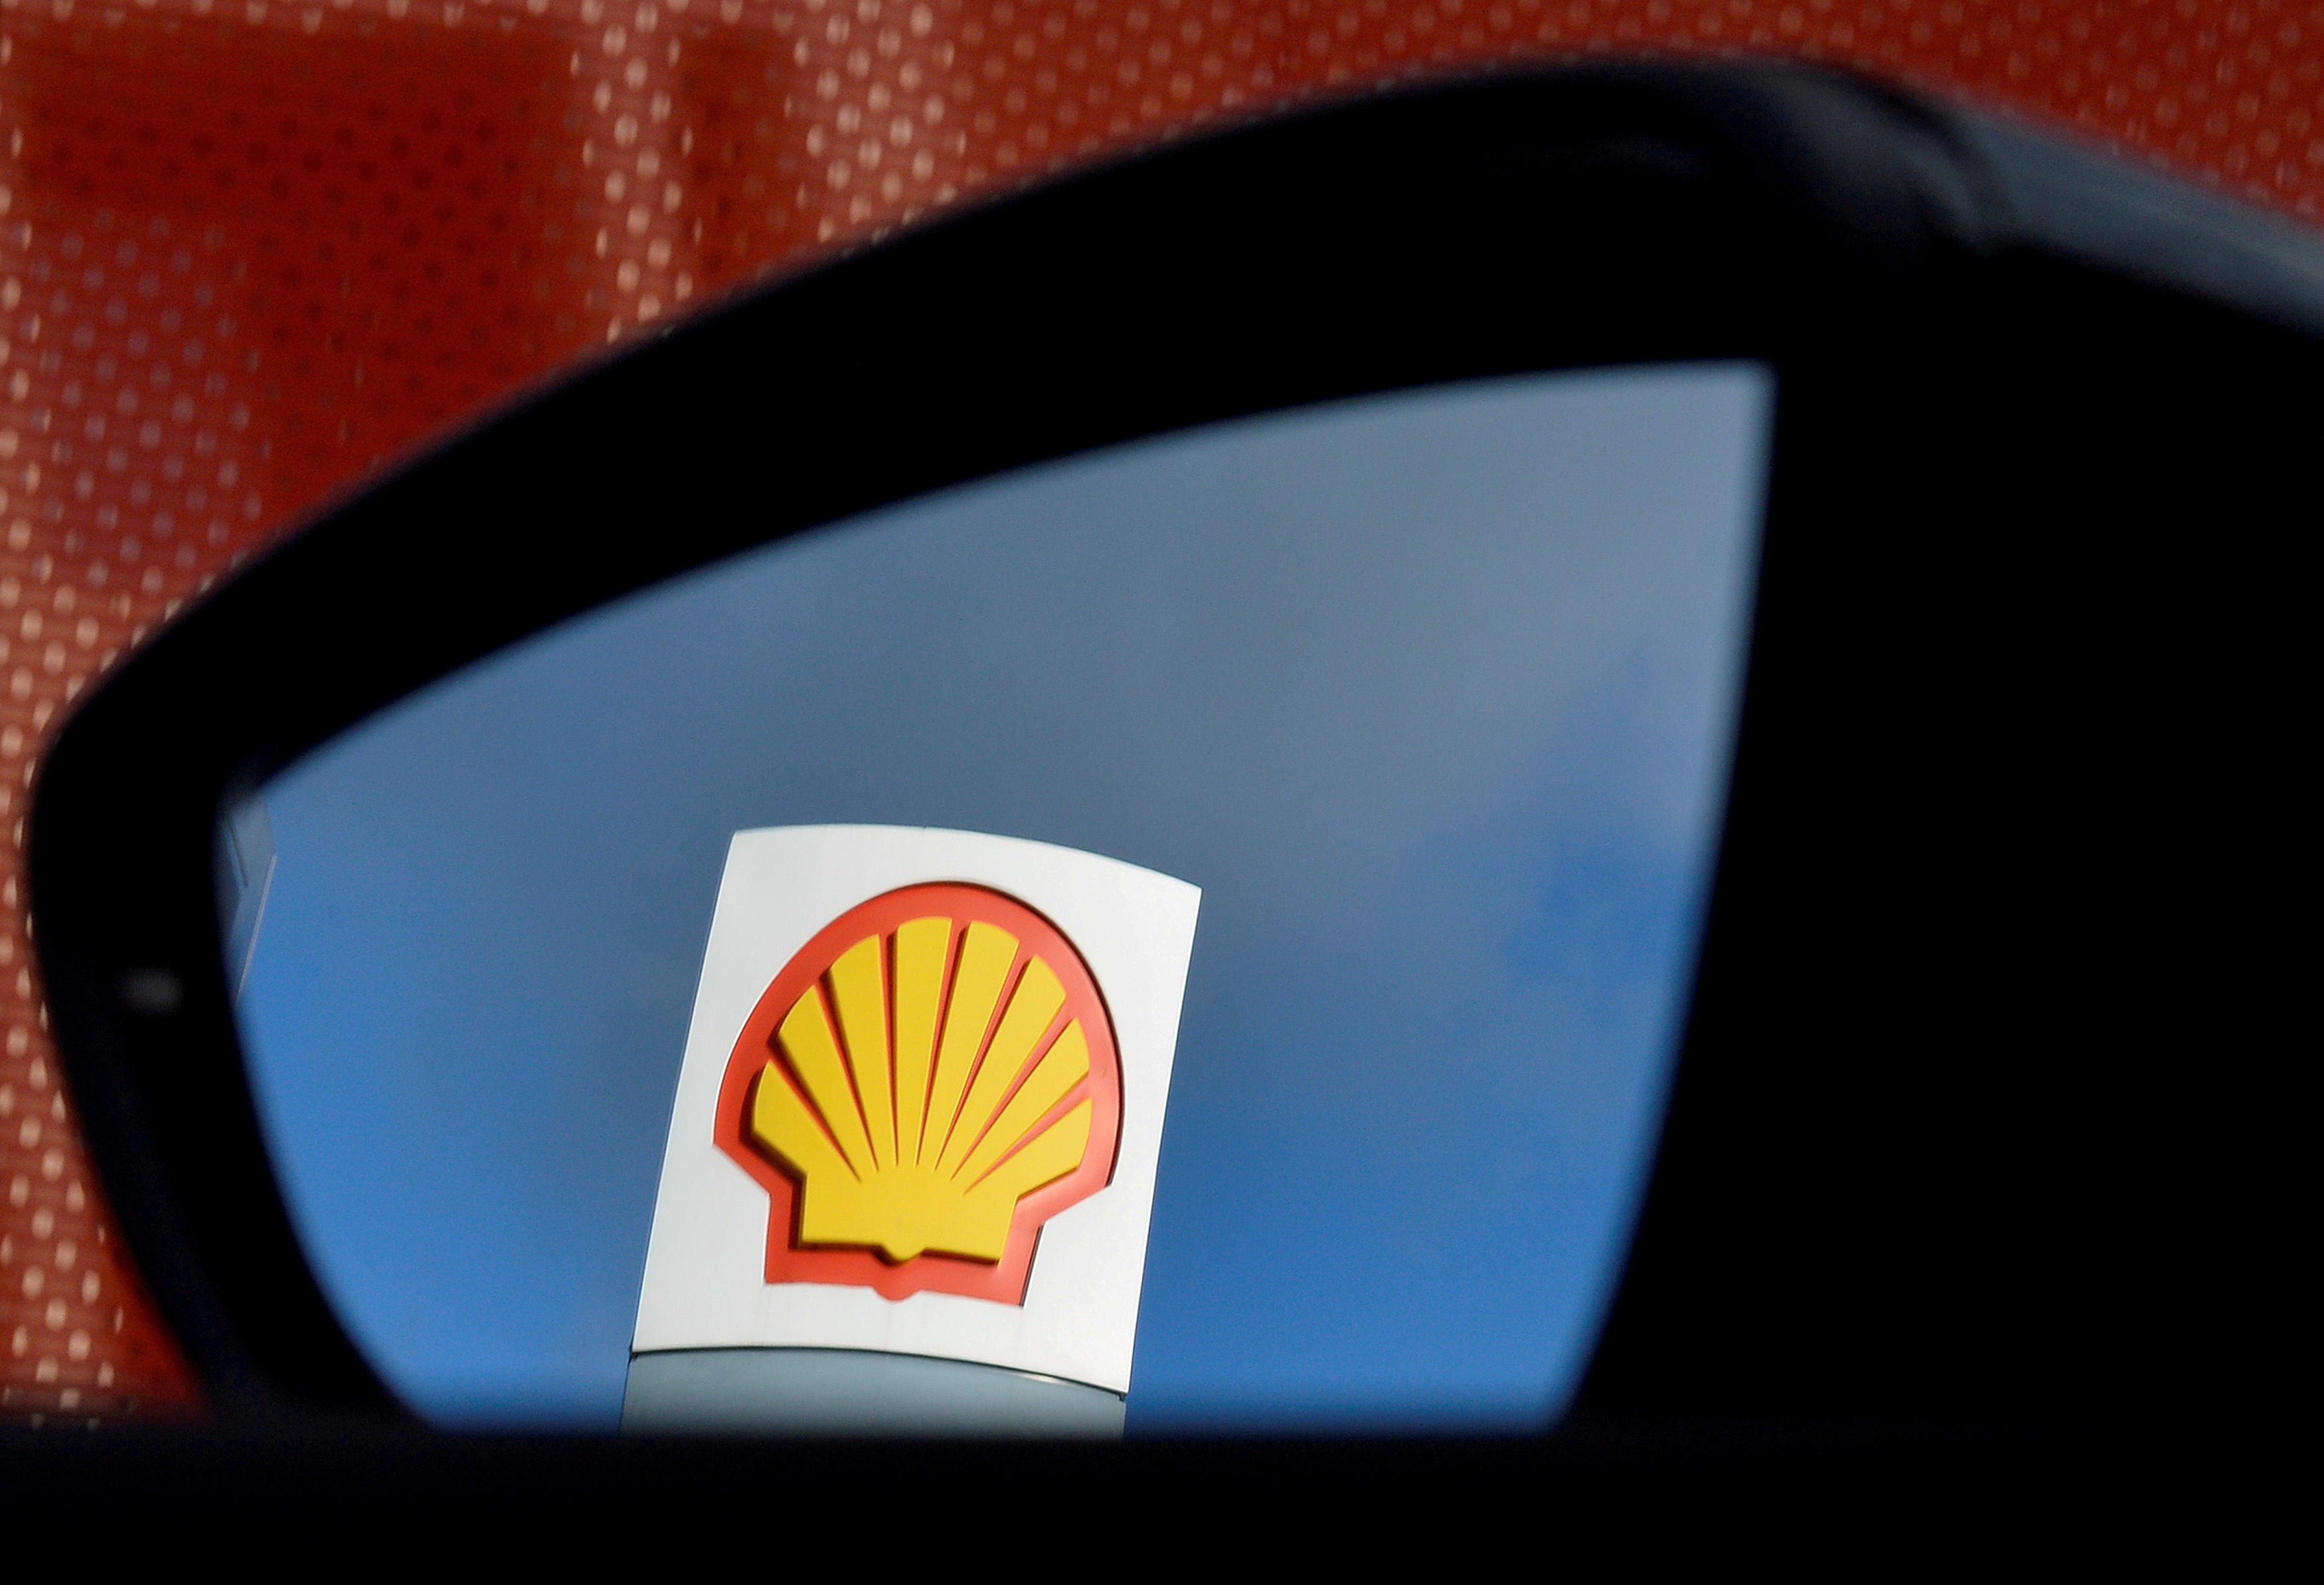 Shell To Sell Its German Schwedt Refinery Stake In 2021 Reuters